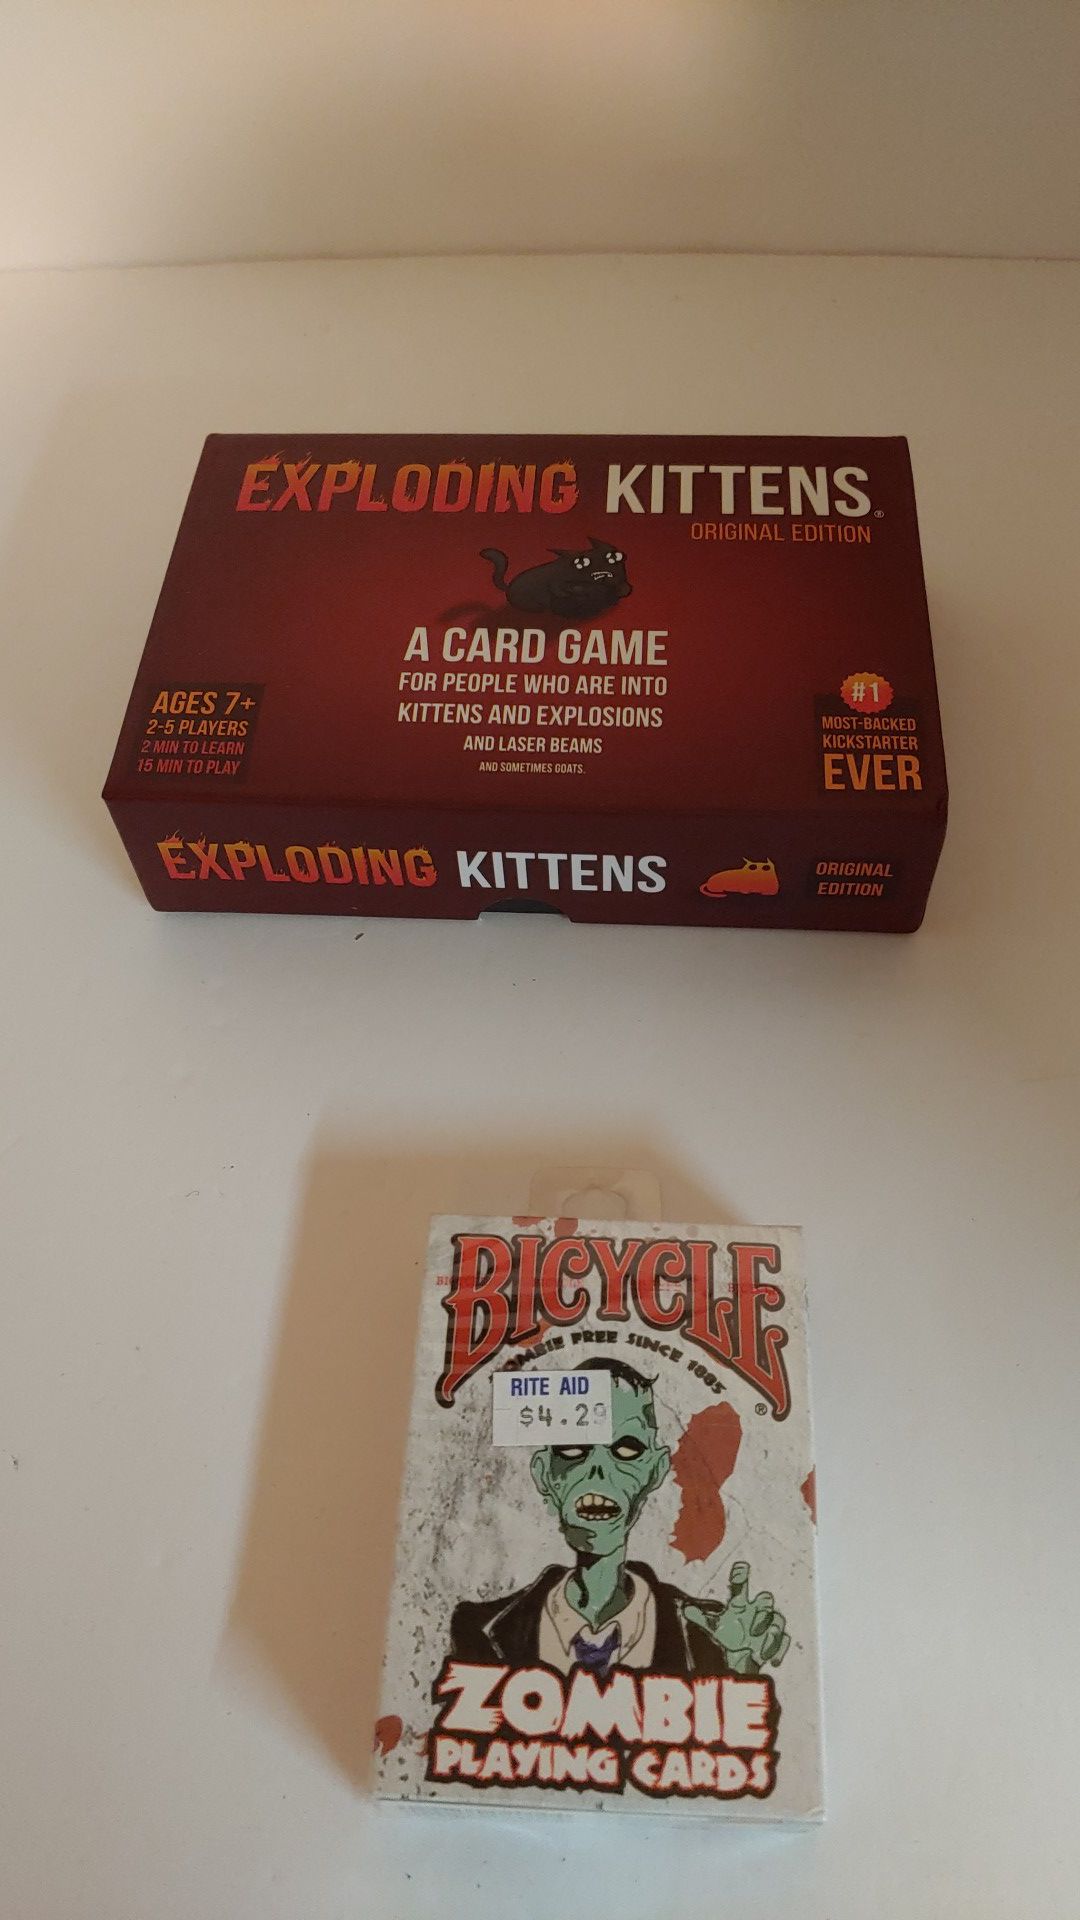 Exploding kittens and zombie cards